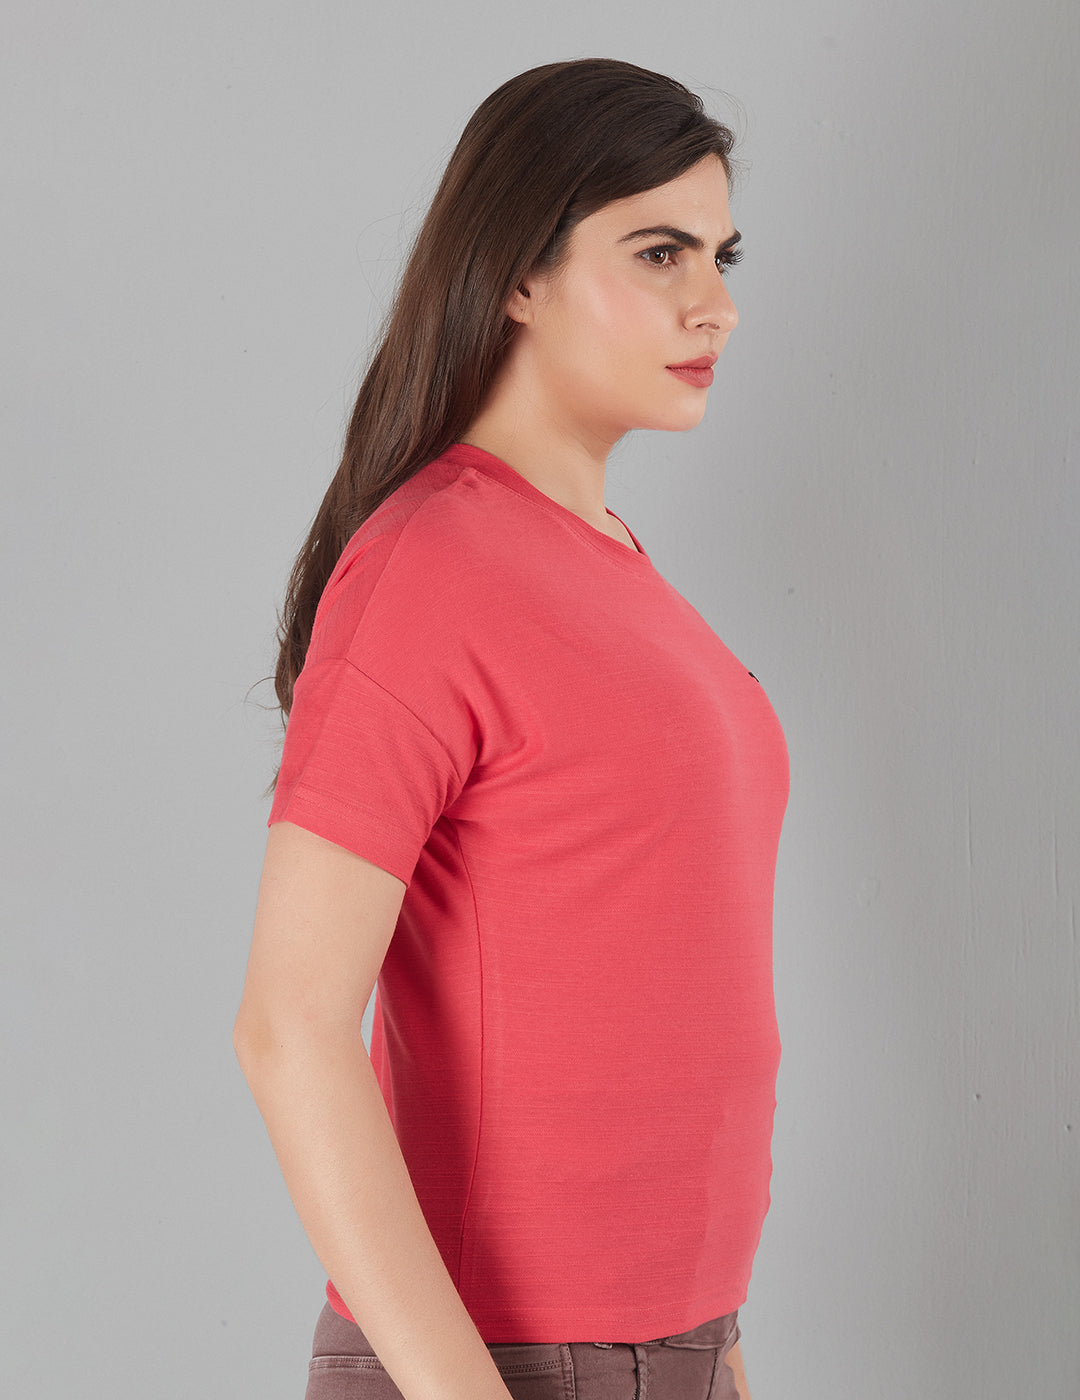 Stylish Plain Short T-Shirts for women In Hot Pink At Best Price